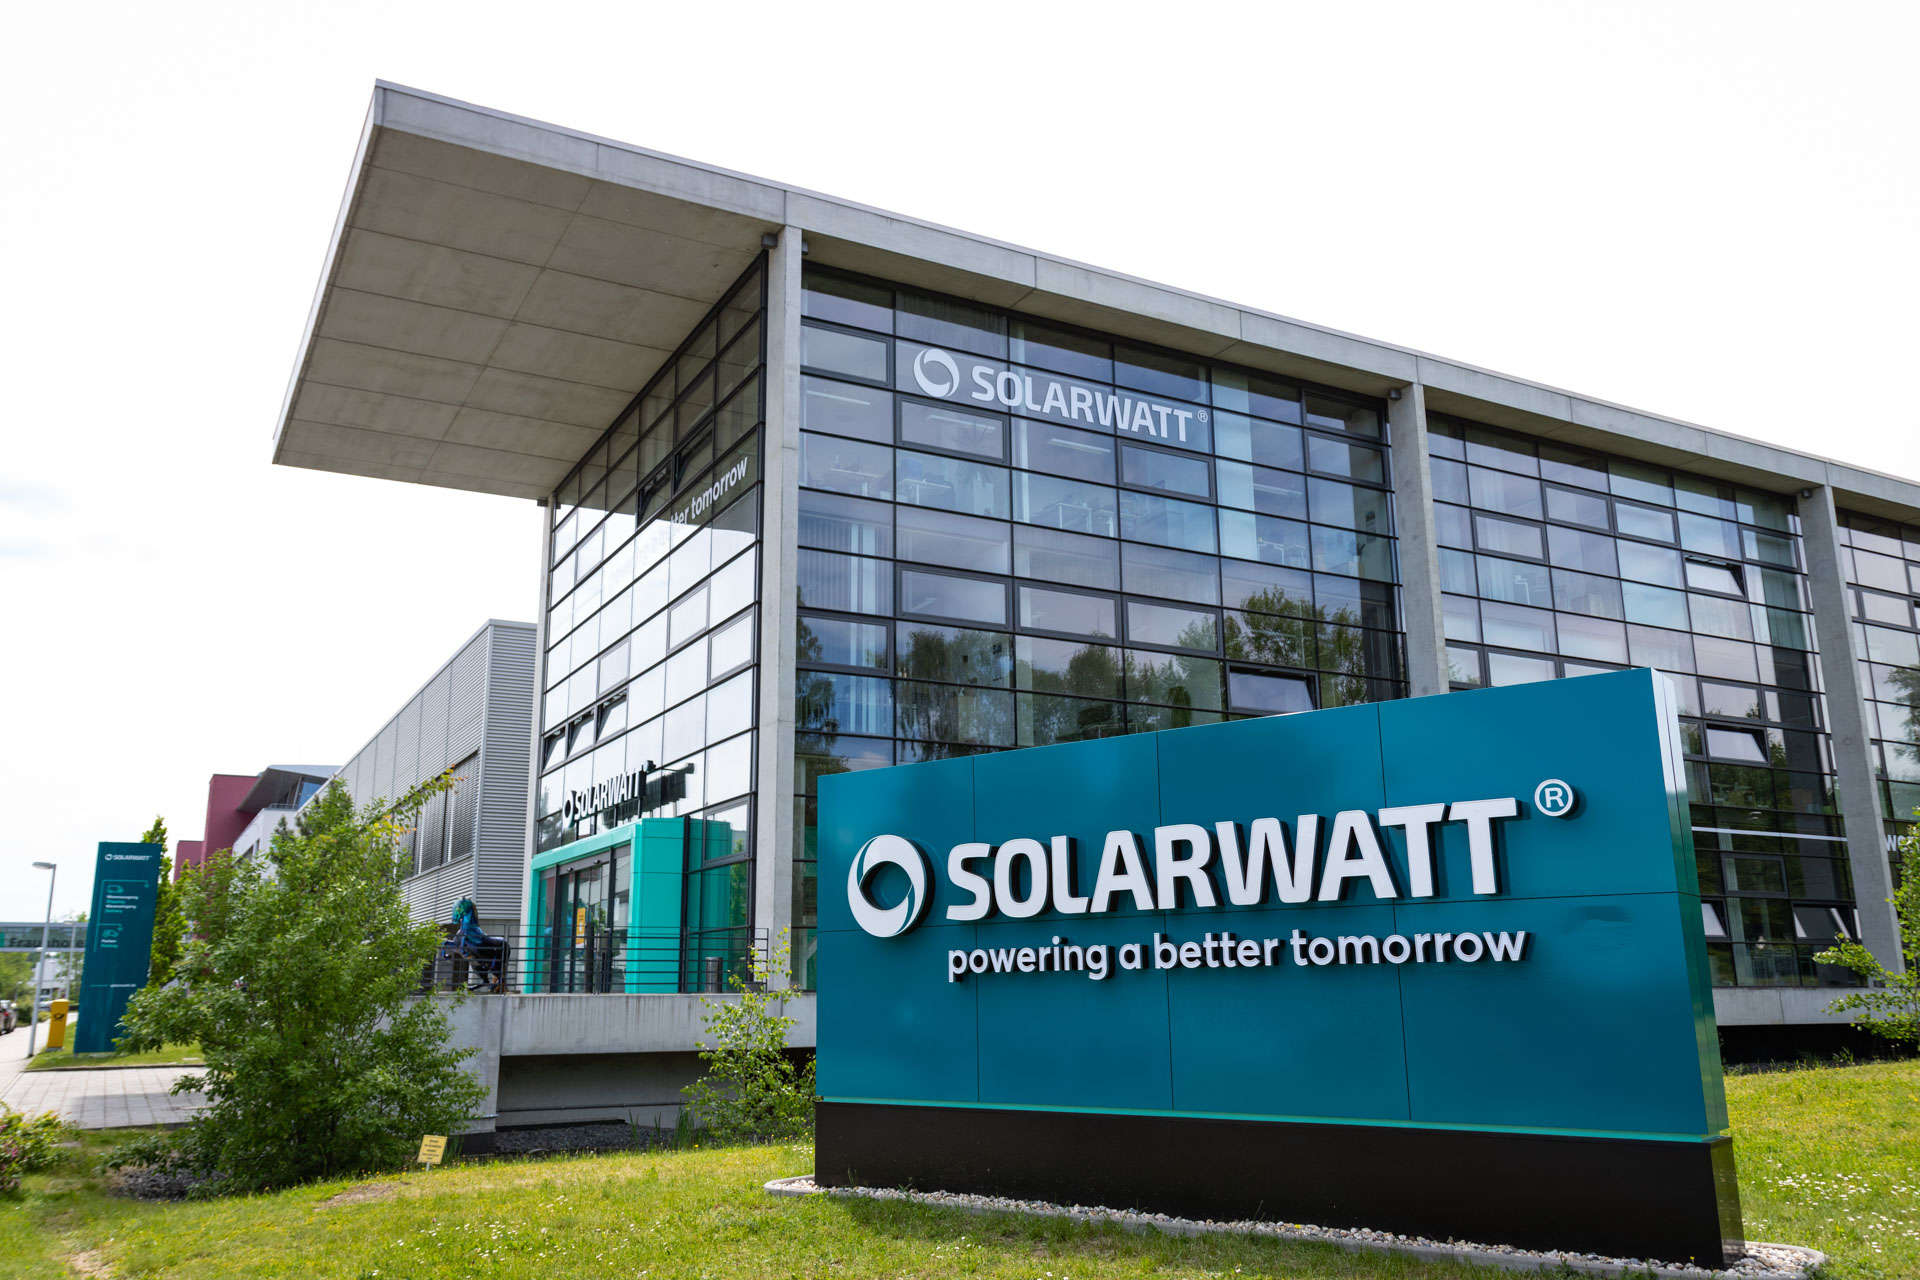 Solarwatt flexes muscles in home energy storage fight with Shell, Tesla